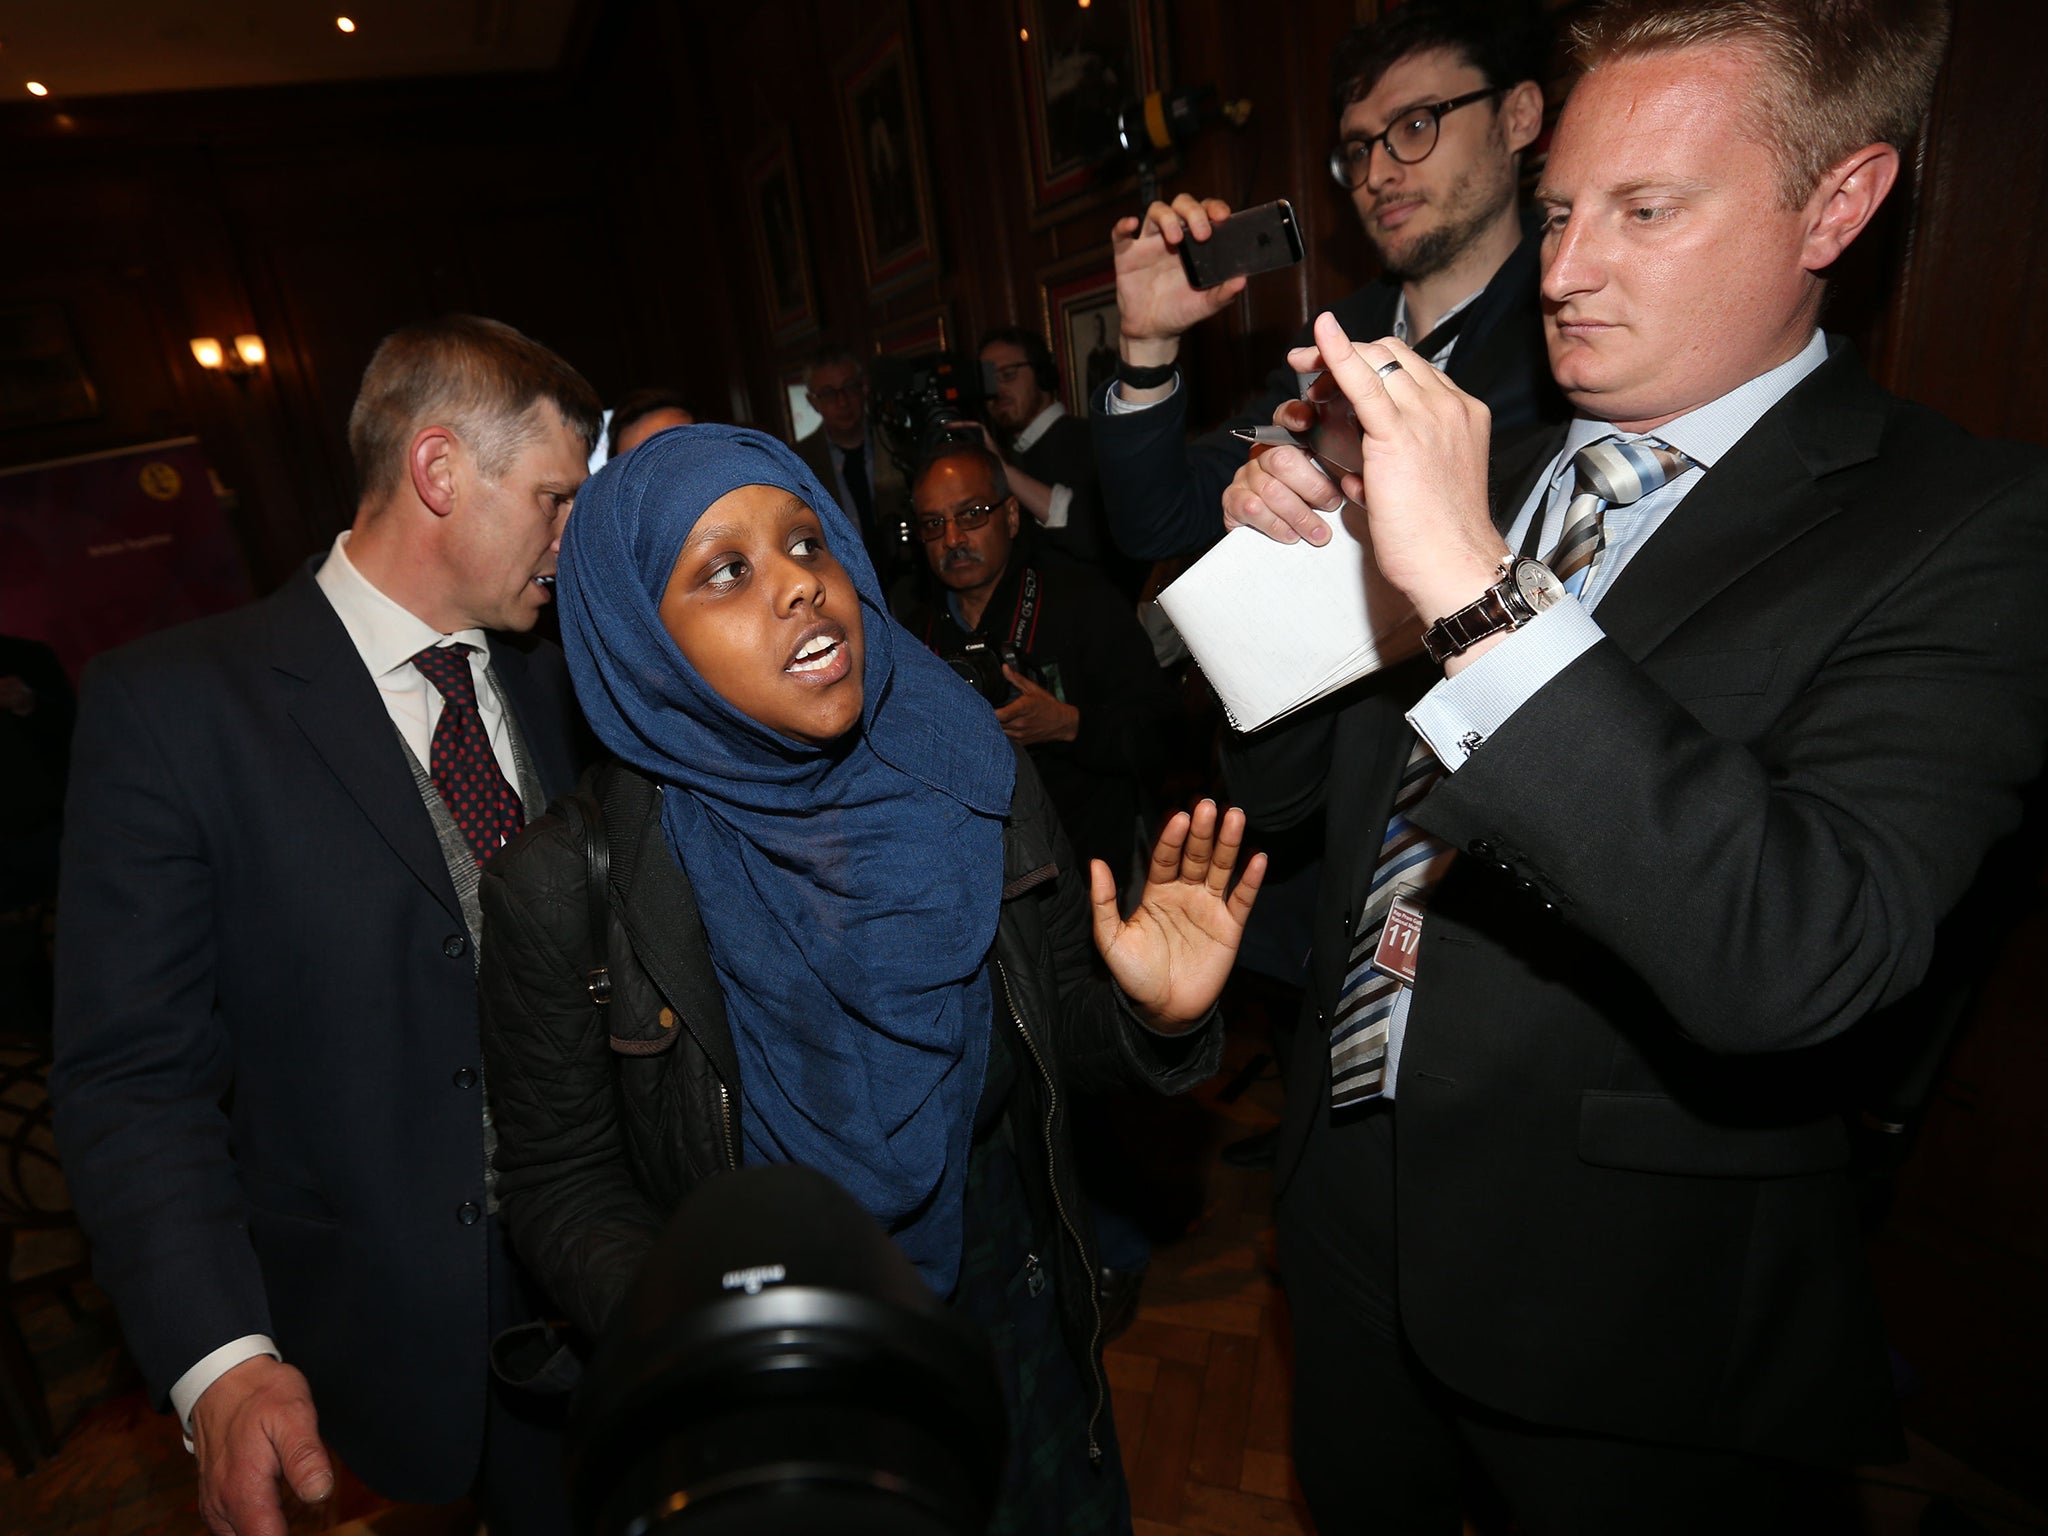 Anti-racism protesters disrupted the start of the Ukip manifesto launch